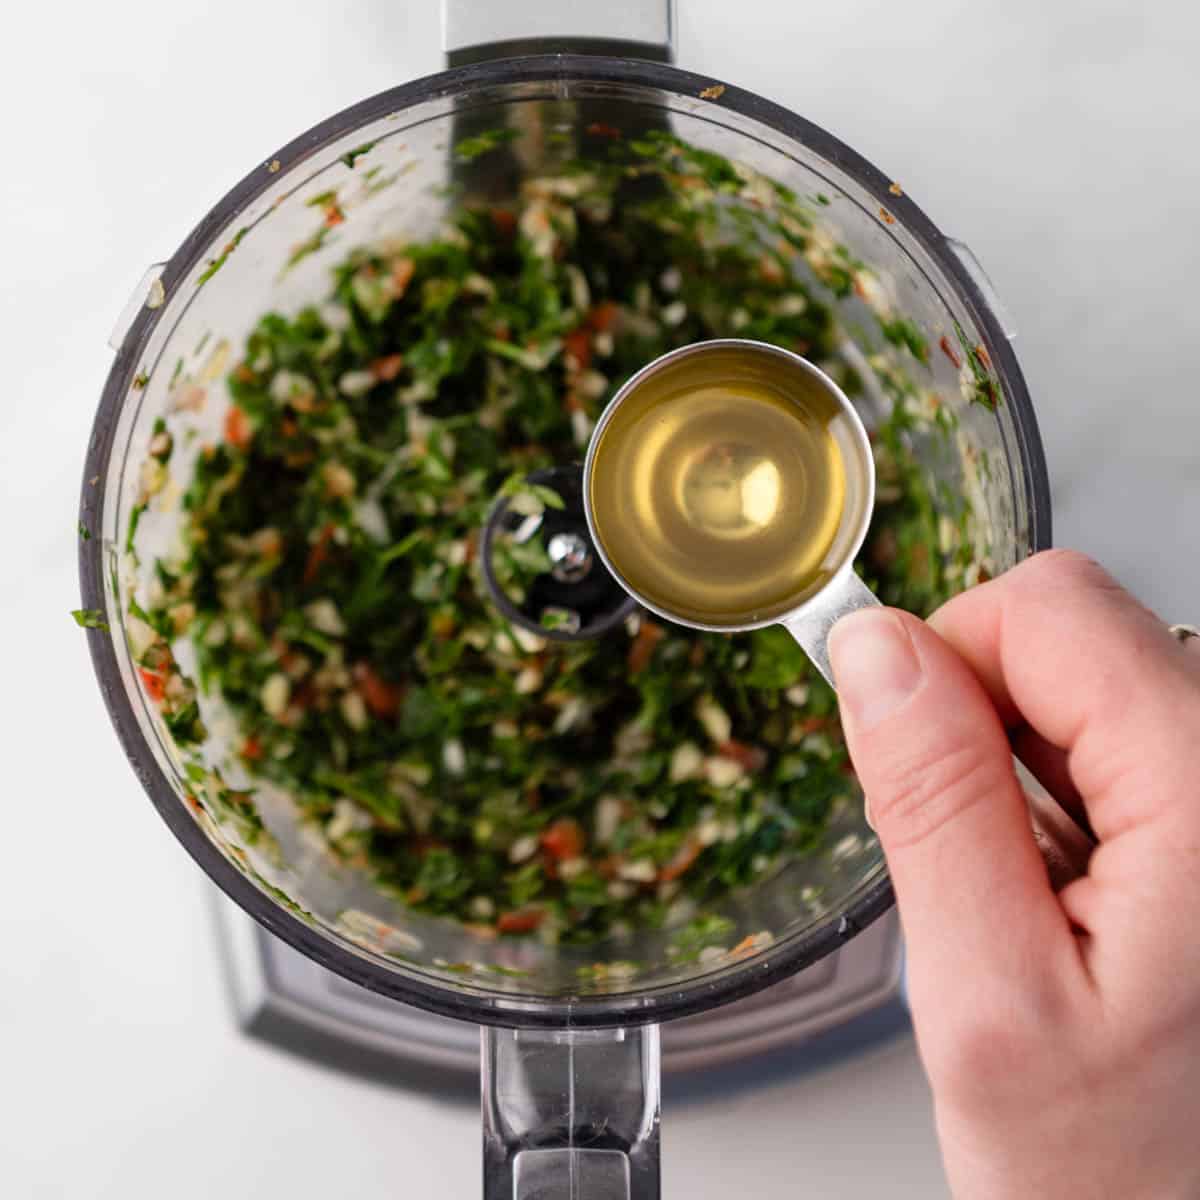 Hand holding tablespoon of olive oil over food processor with blended herbs in it